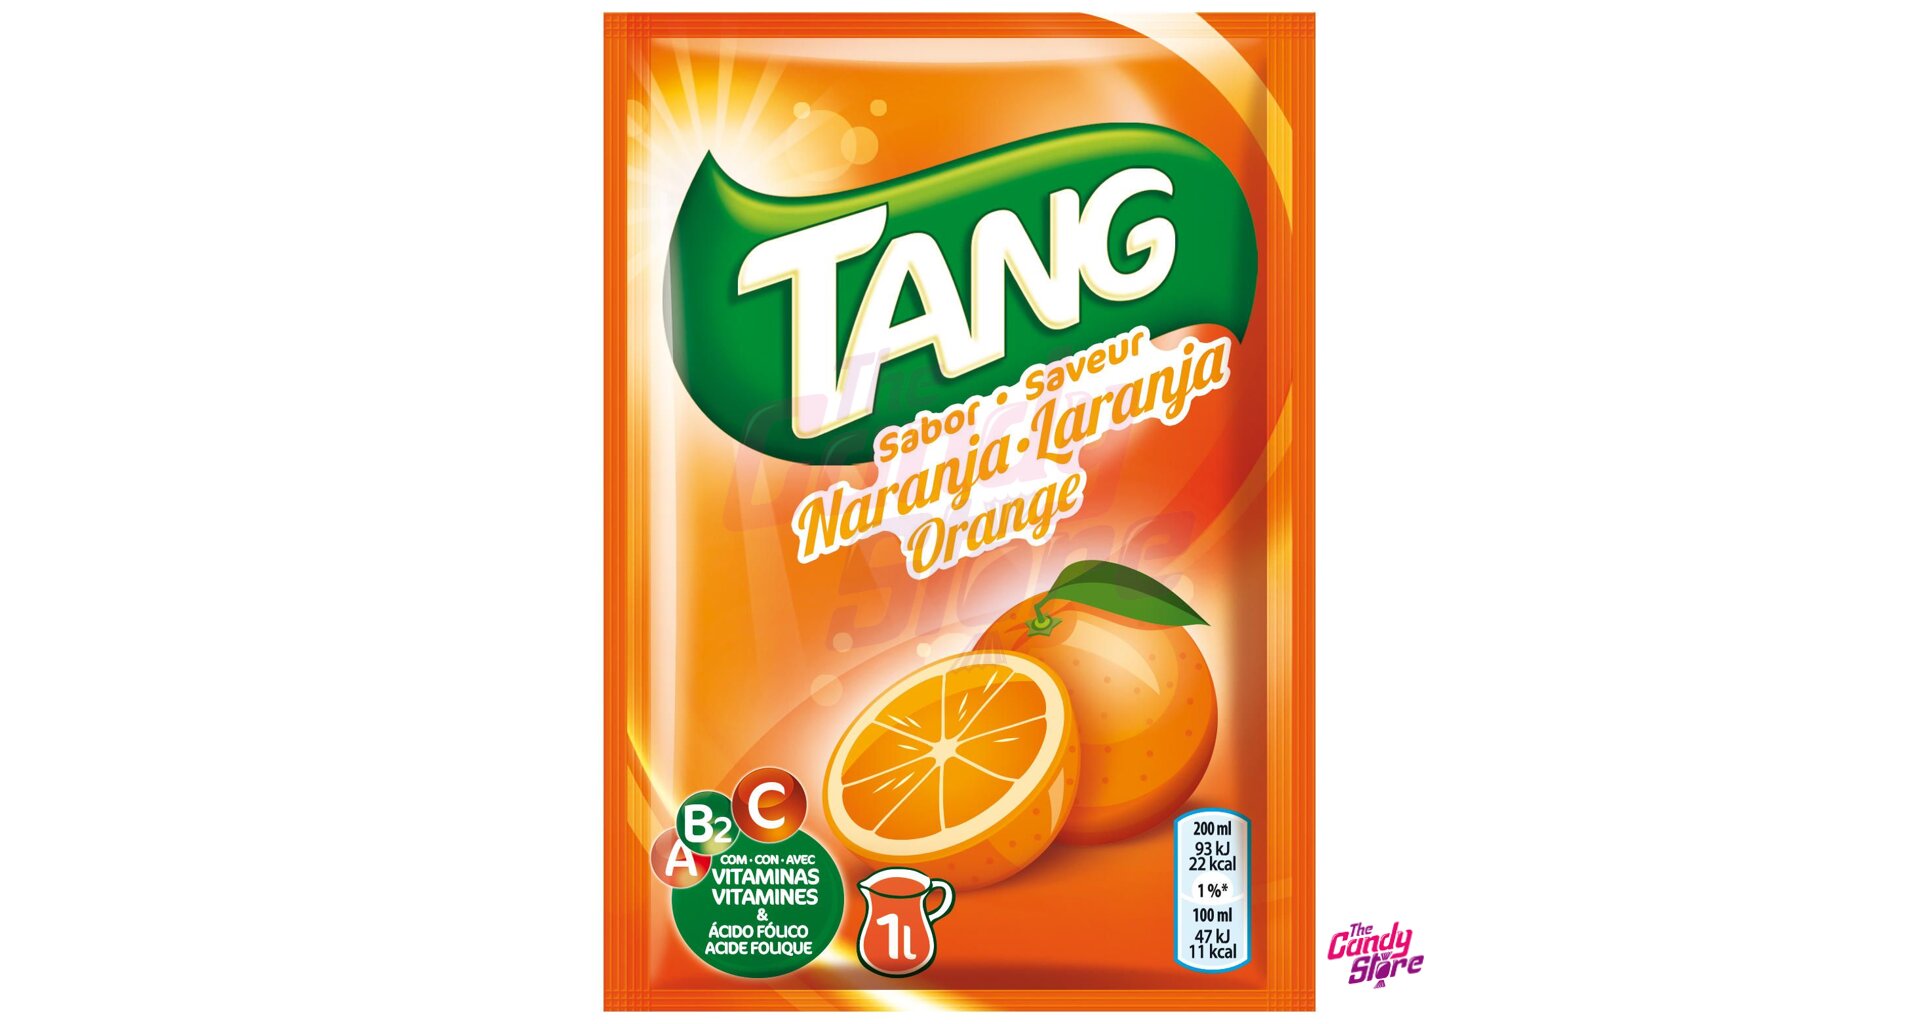 Tang instant drink with orange flavor 30 g 